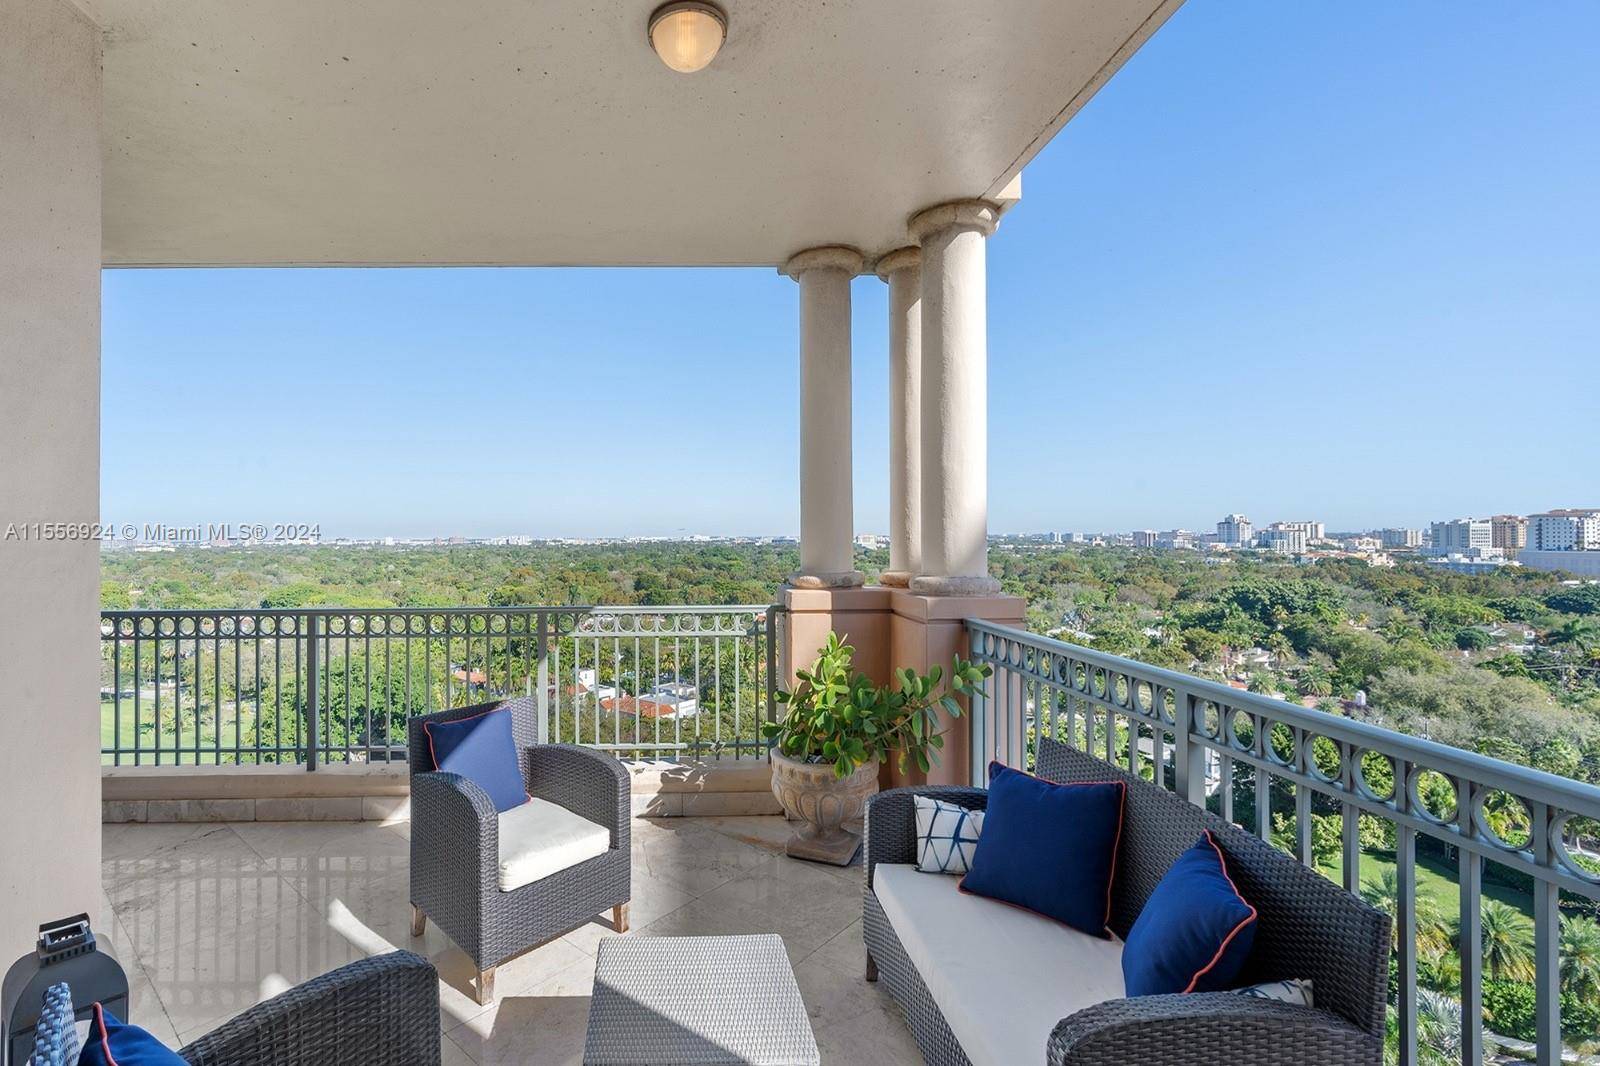 Experience unparalleled luxury living in this 3 bedroom, 3 bathroom condo.